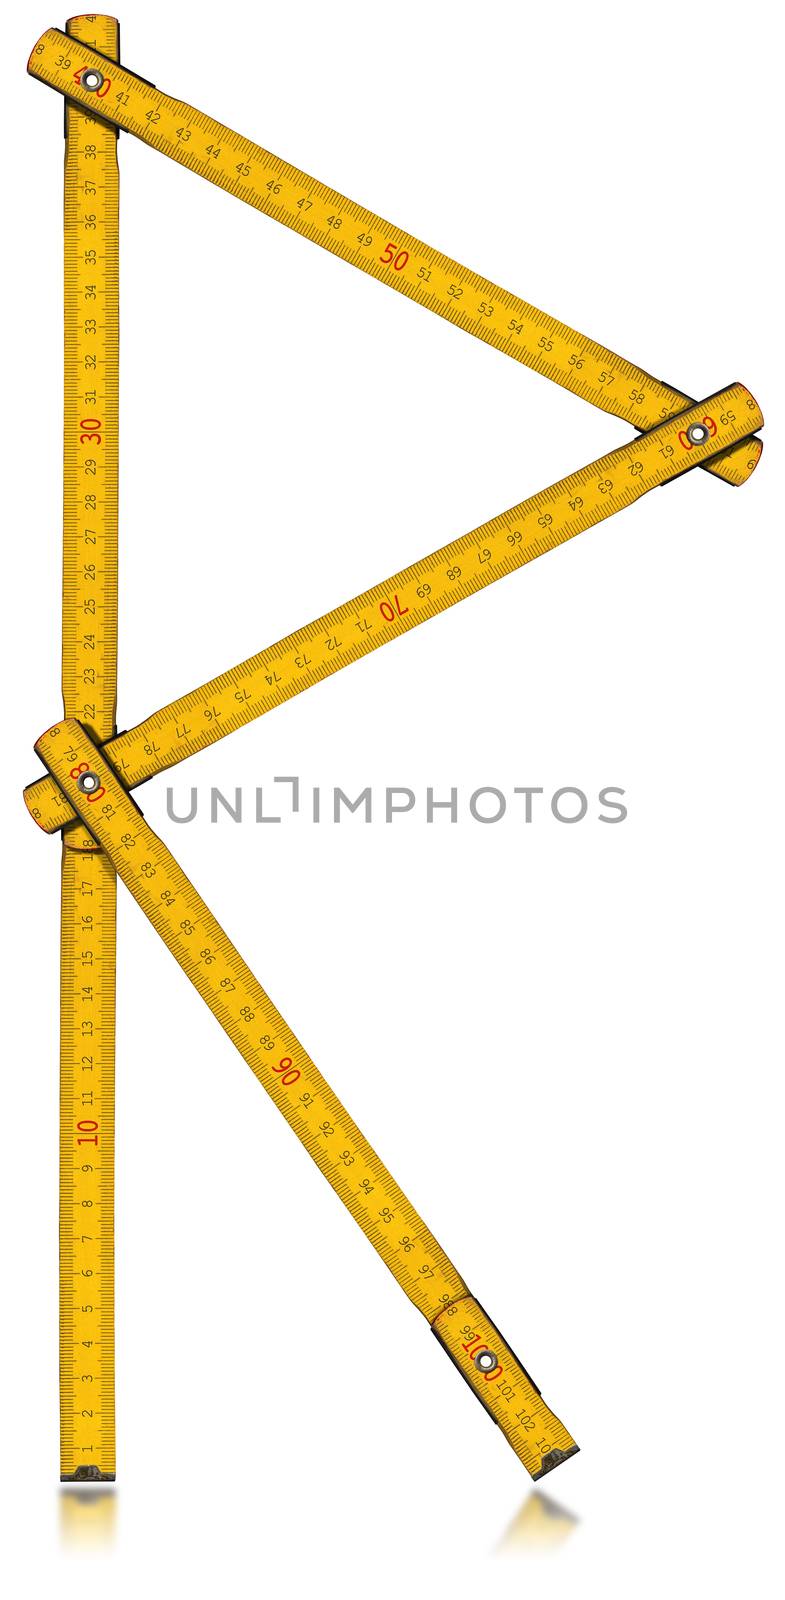 Old wooden yellow meter in the shape of letter R. Isolated on white background.